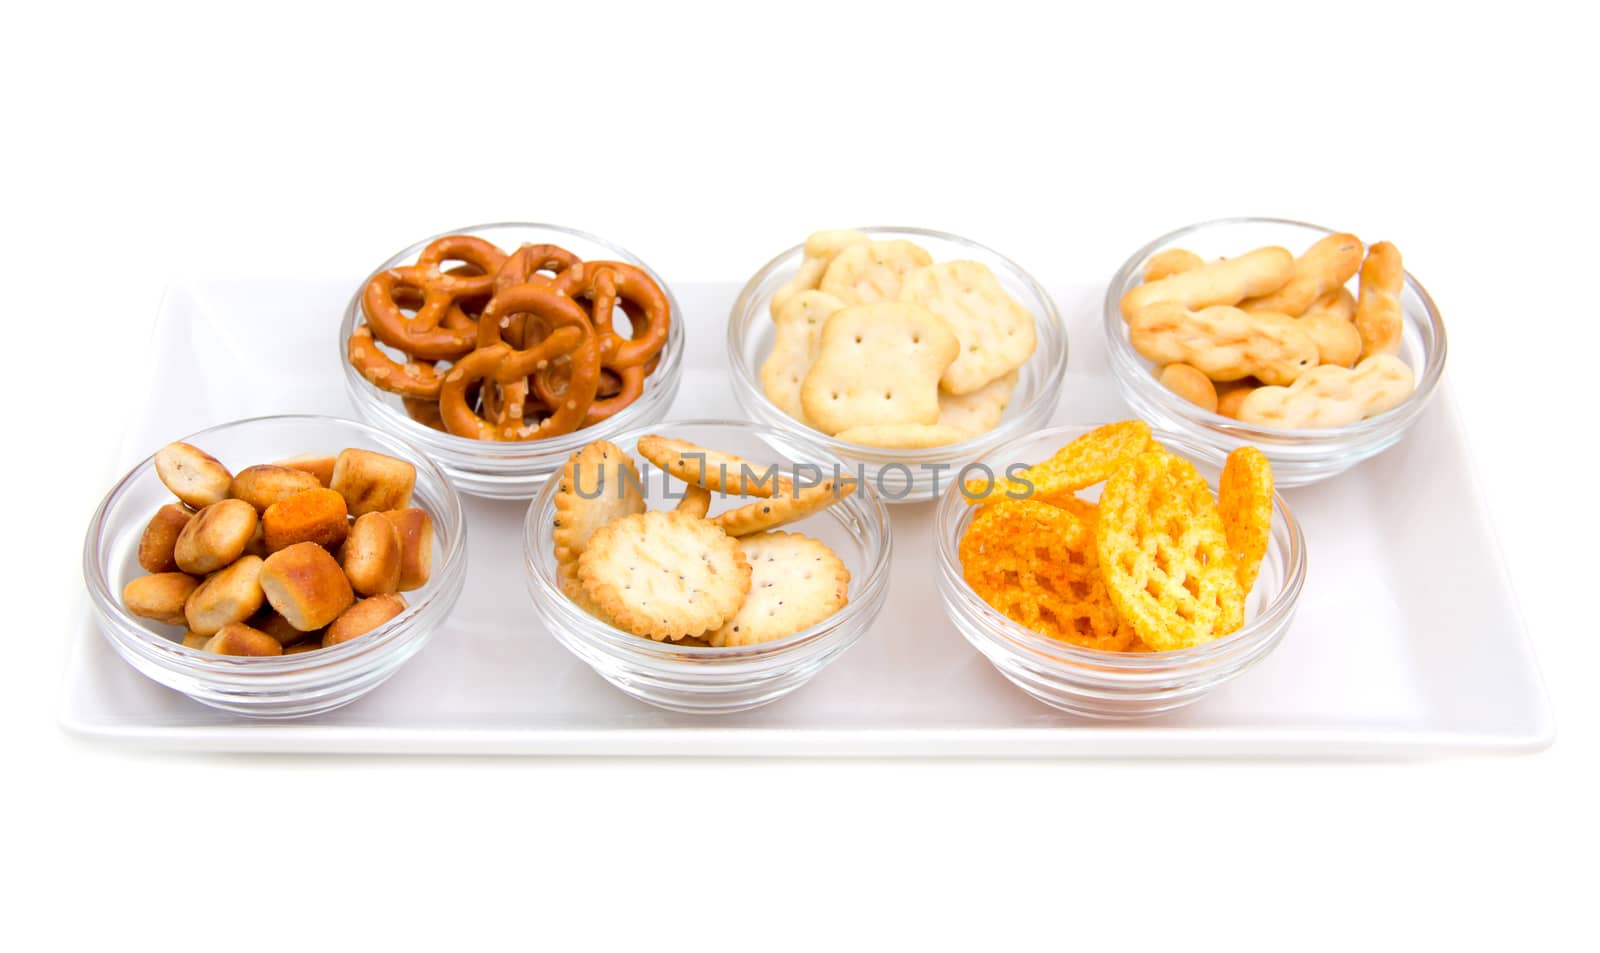 Pretzels on tray by spafra